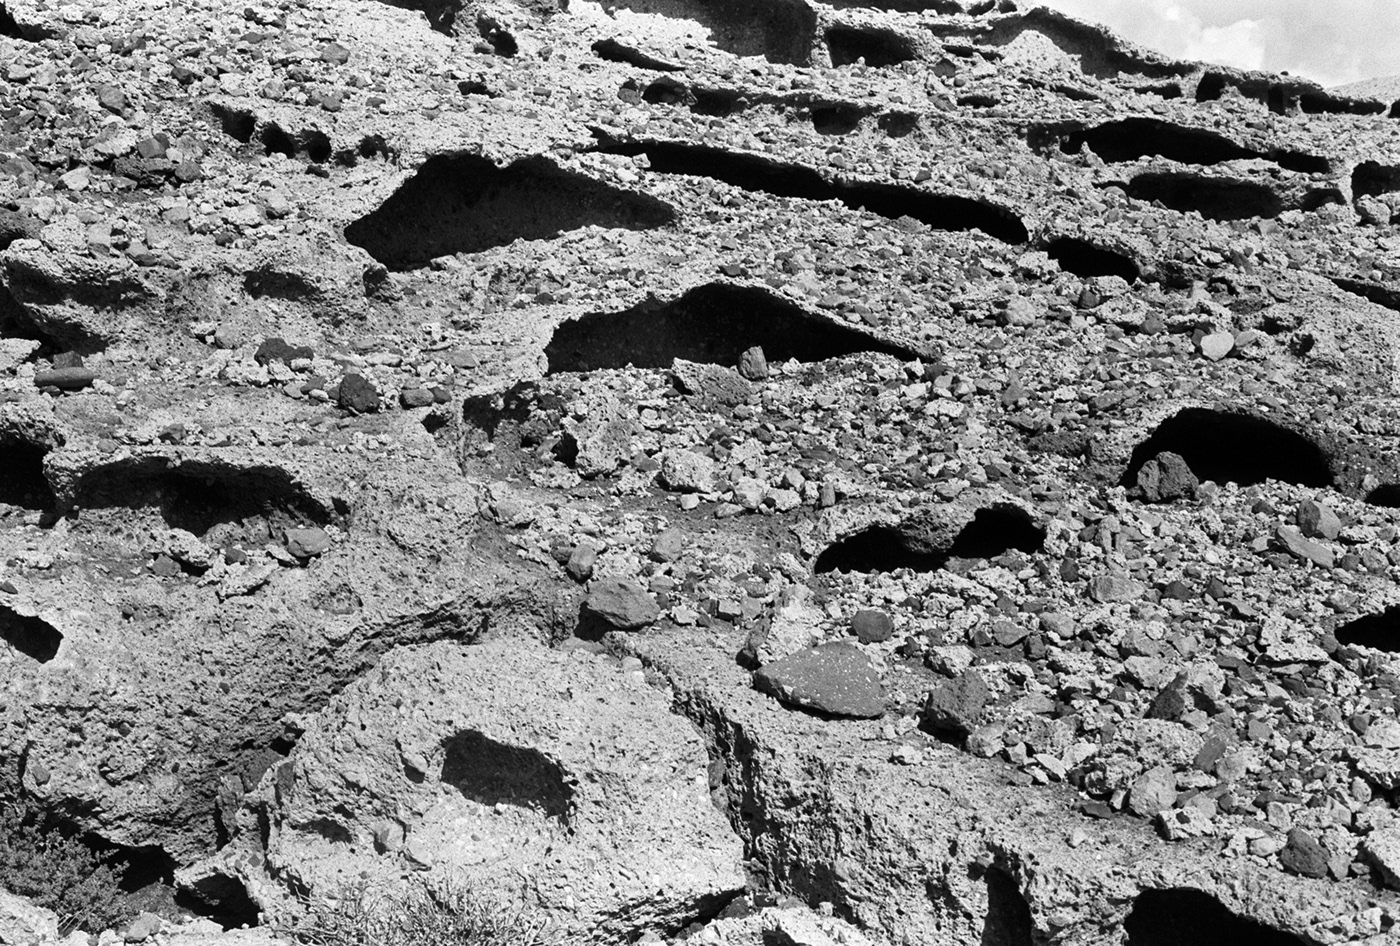 Black and white close-up photograph of the pumice stone rocks on the rock face at Tajao, Tenerife.